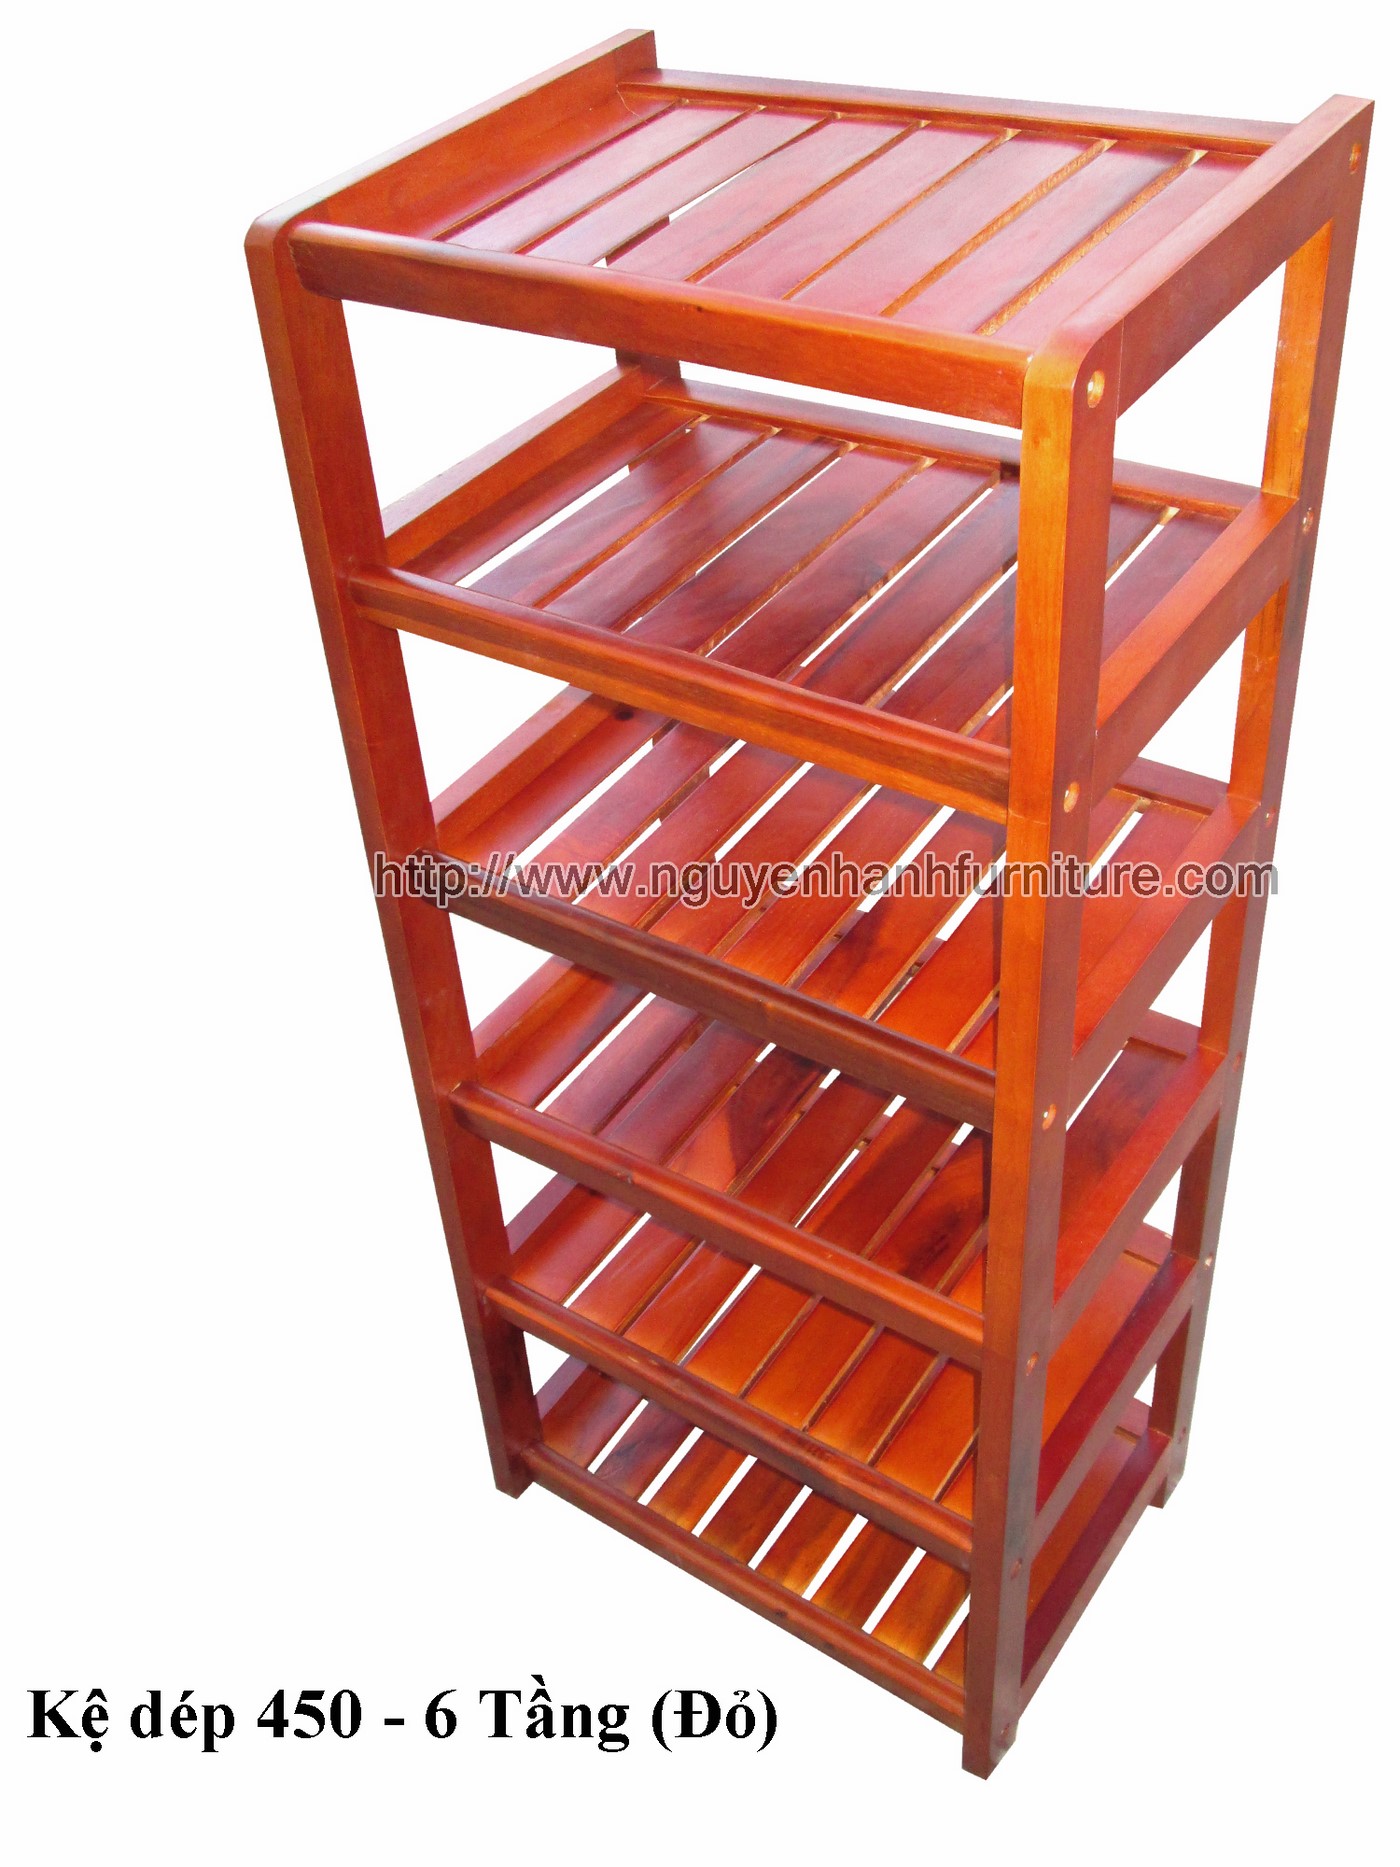 Name product: Shoeshelf 6 Floors 45 with sparse blades (Brown)- Dimensions: 45 x 30 x 98 (H) - Description: Wood natural rubber